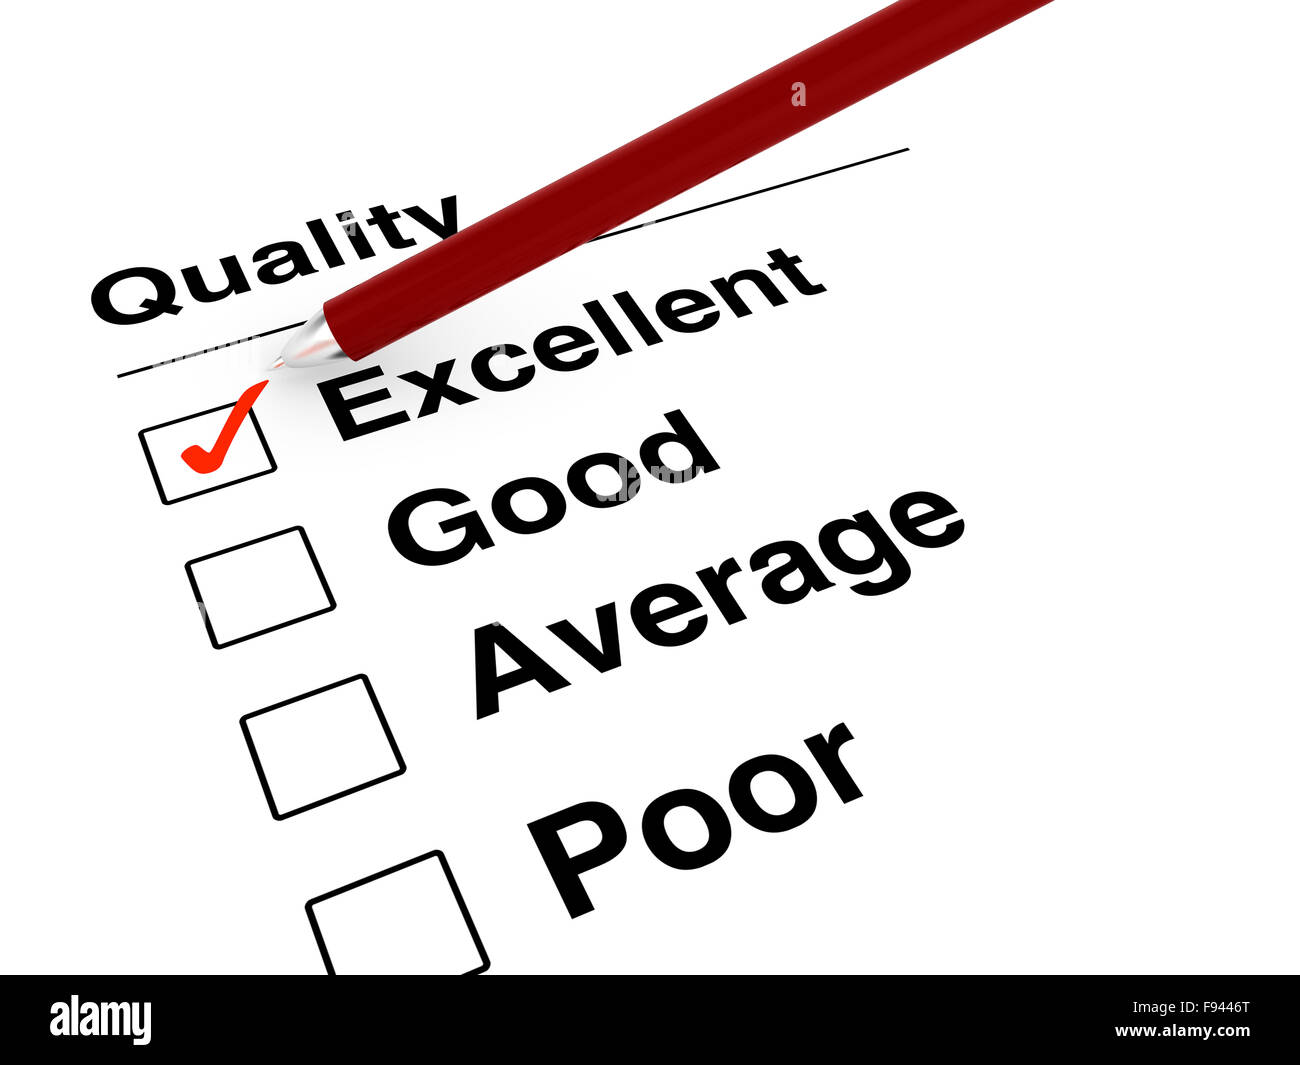 Red ball pen setting a red tick mark at excellent on quality checklist illustration Stock Photo